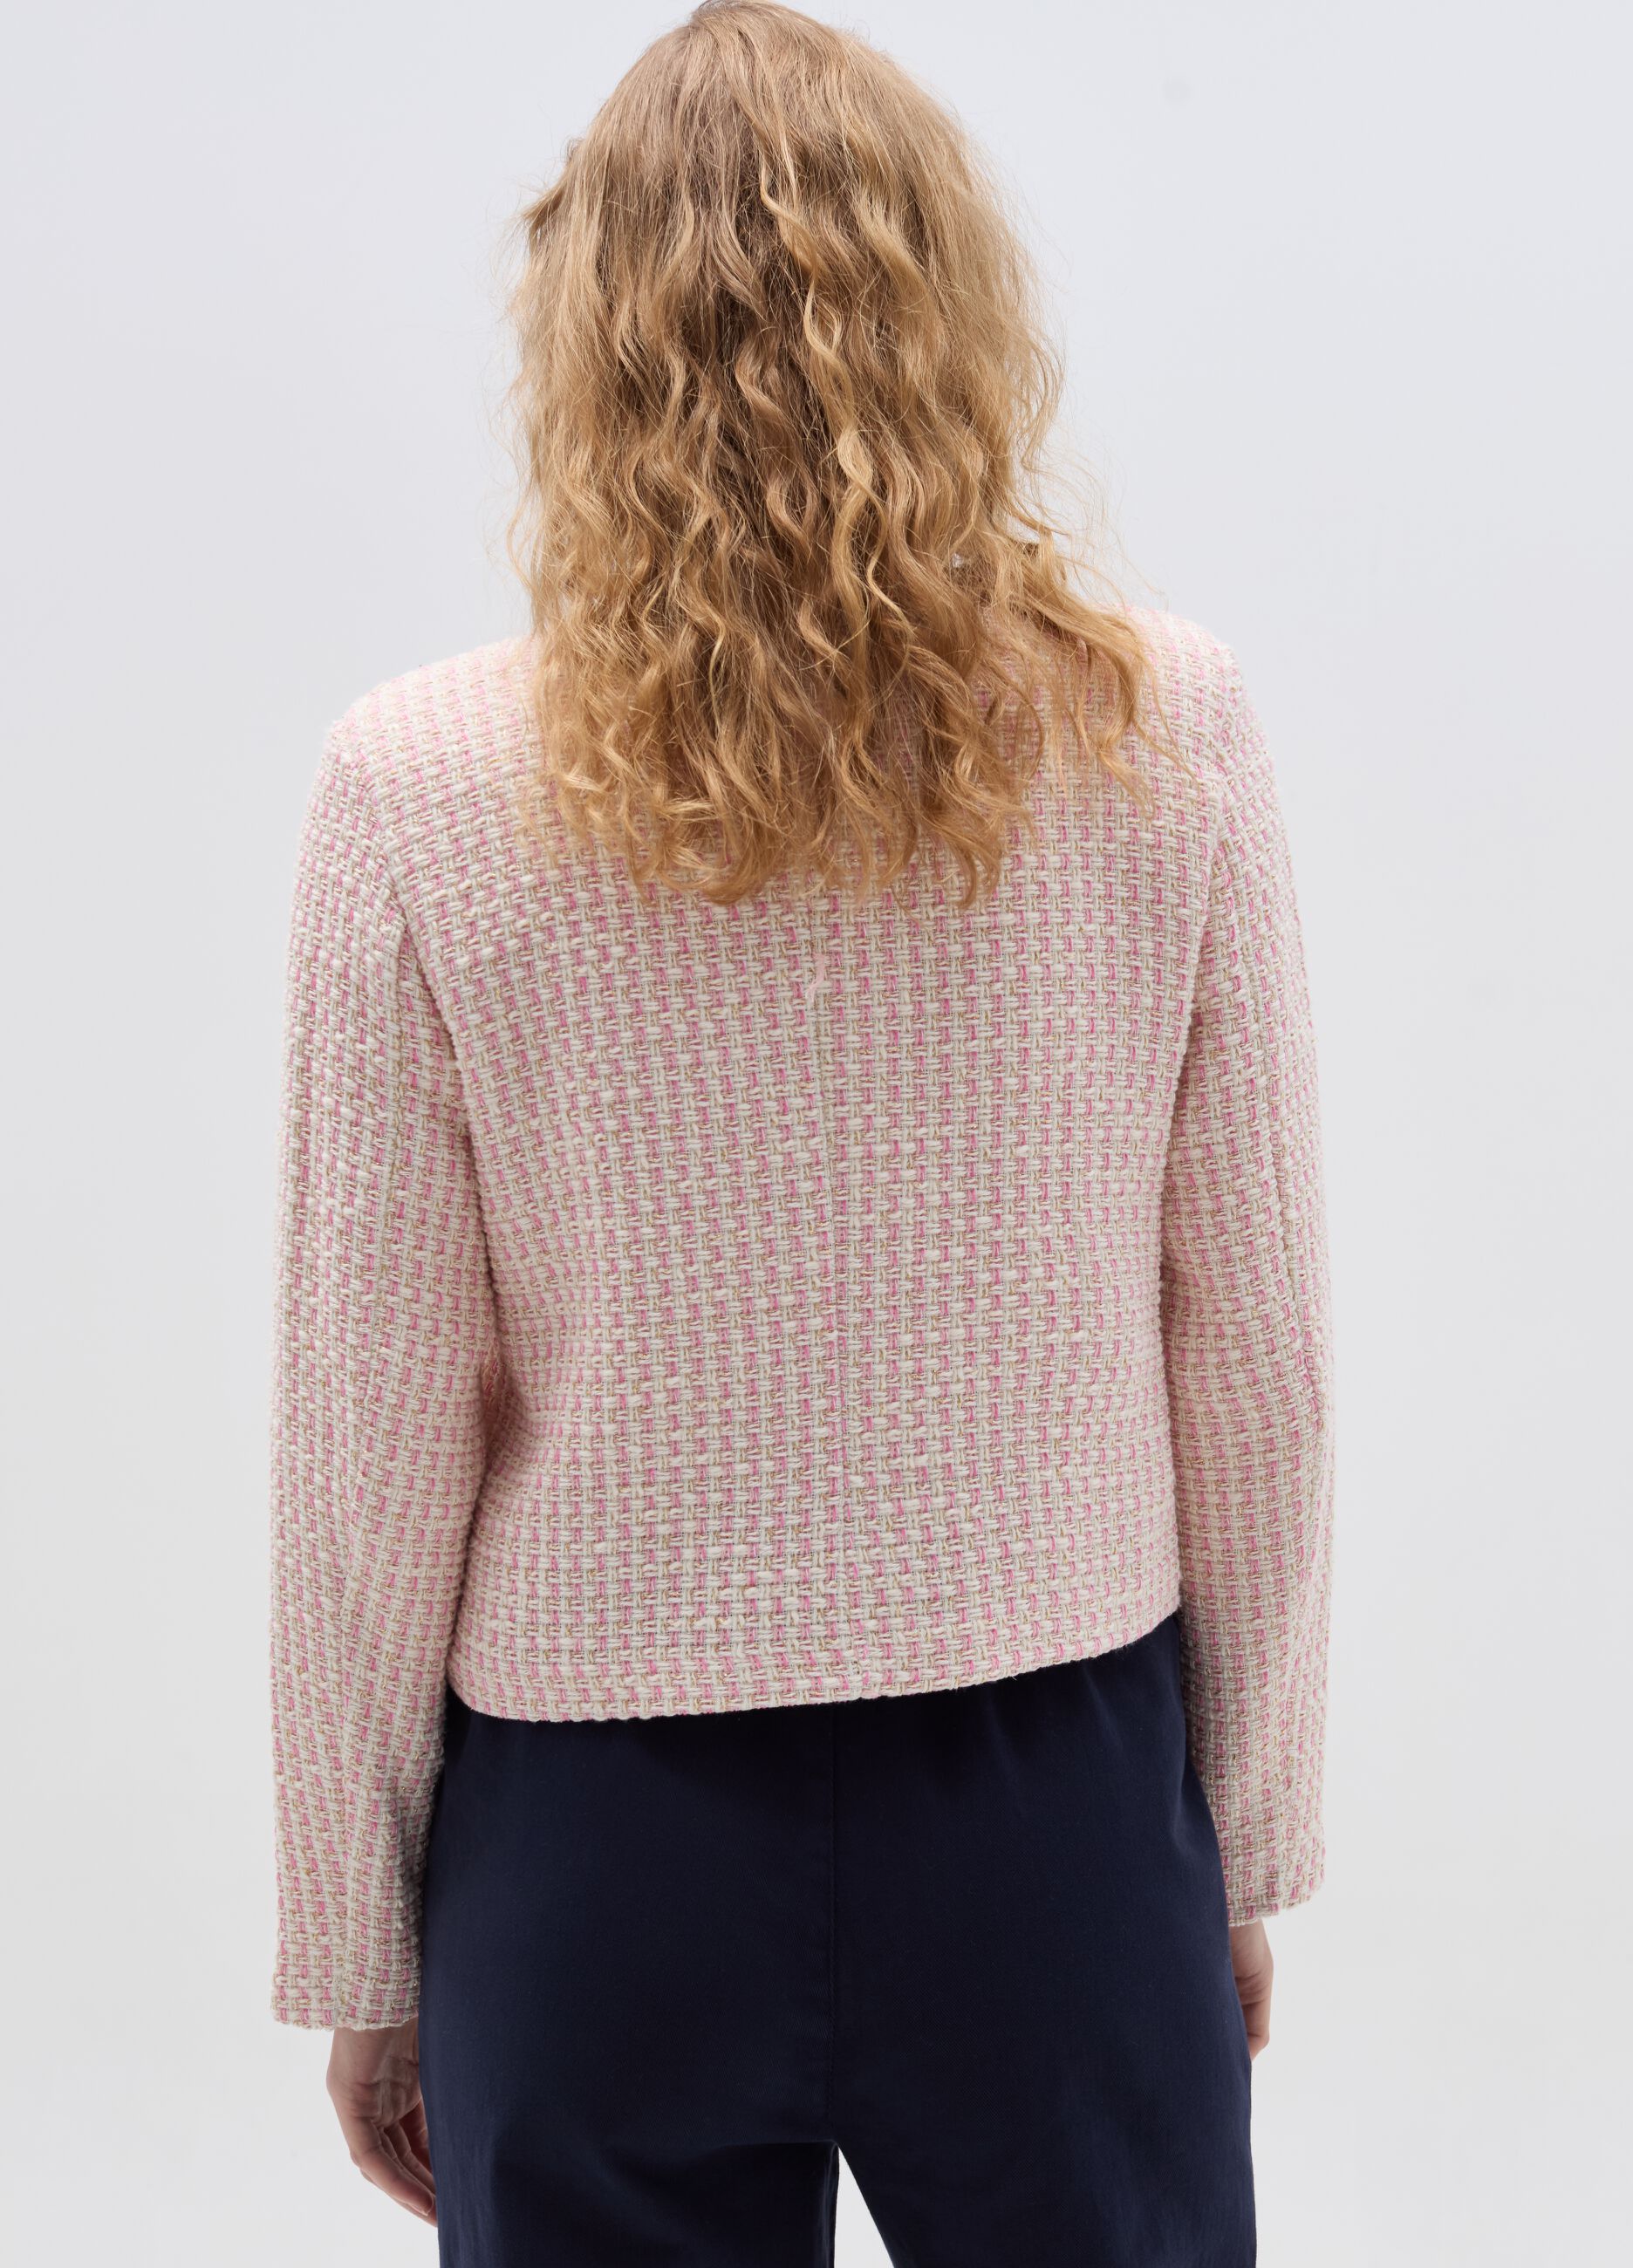 Short jacket with two-tone weave